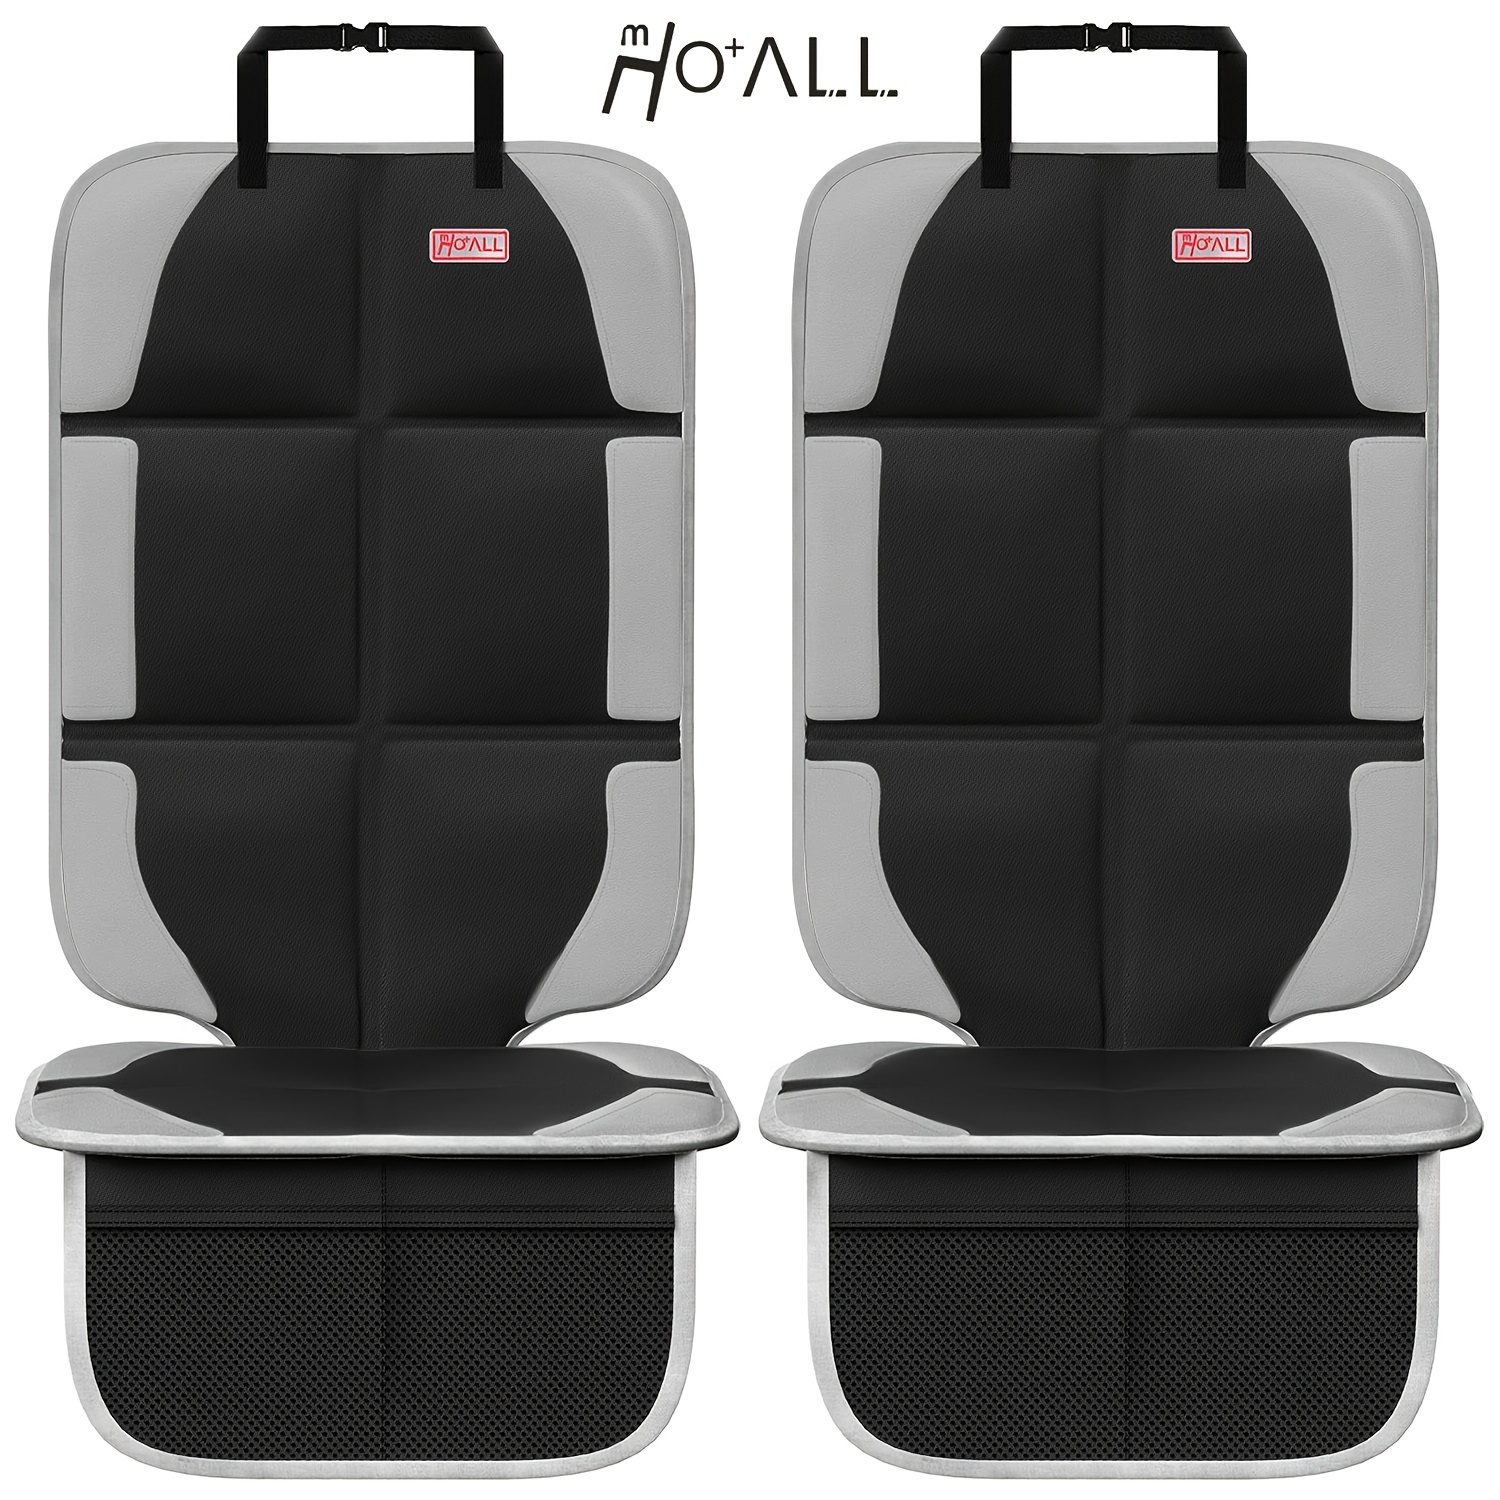 

2pcs Thickened Anti-skid Car Seat Protector Made Of Wear-resistant Oxford And Pvc Material For Suvs, Cars, Trucks.